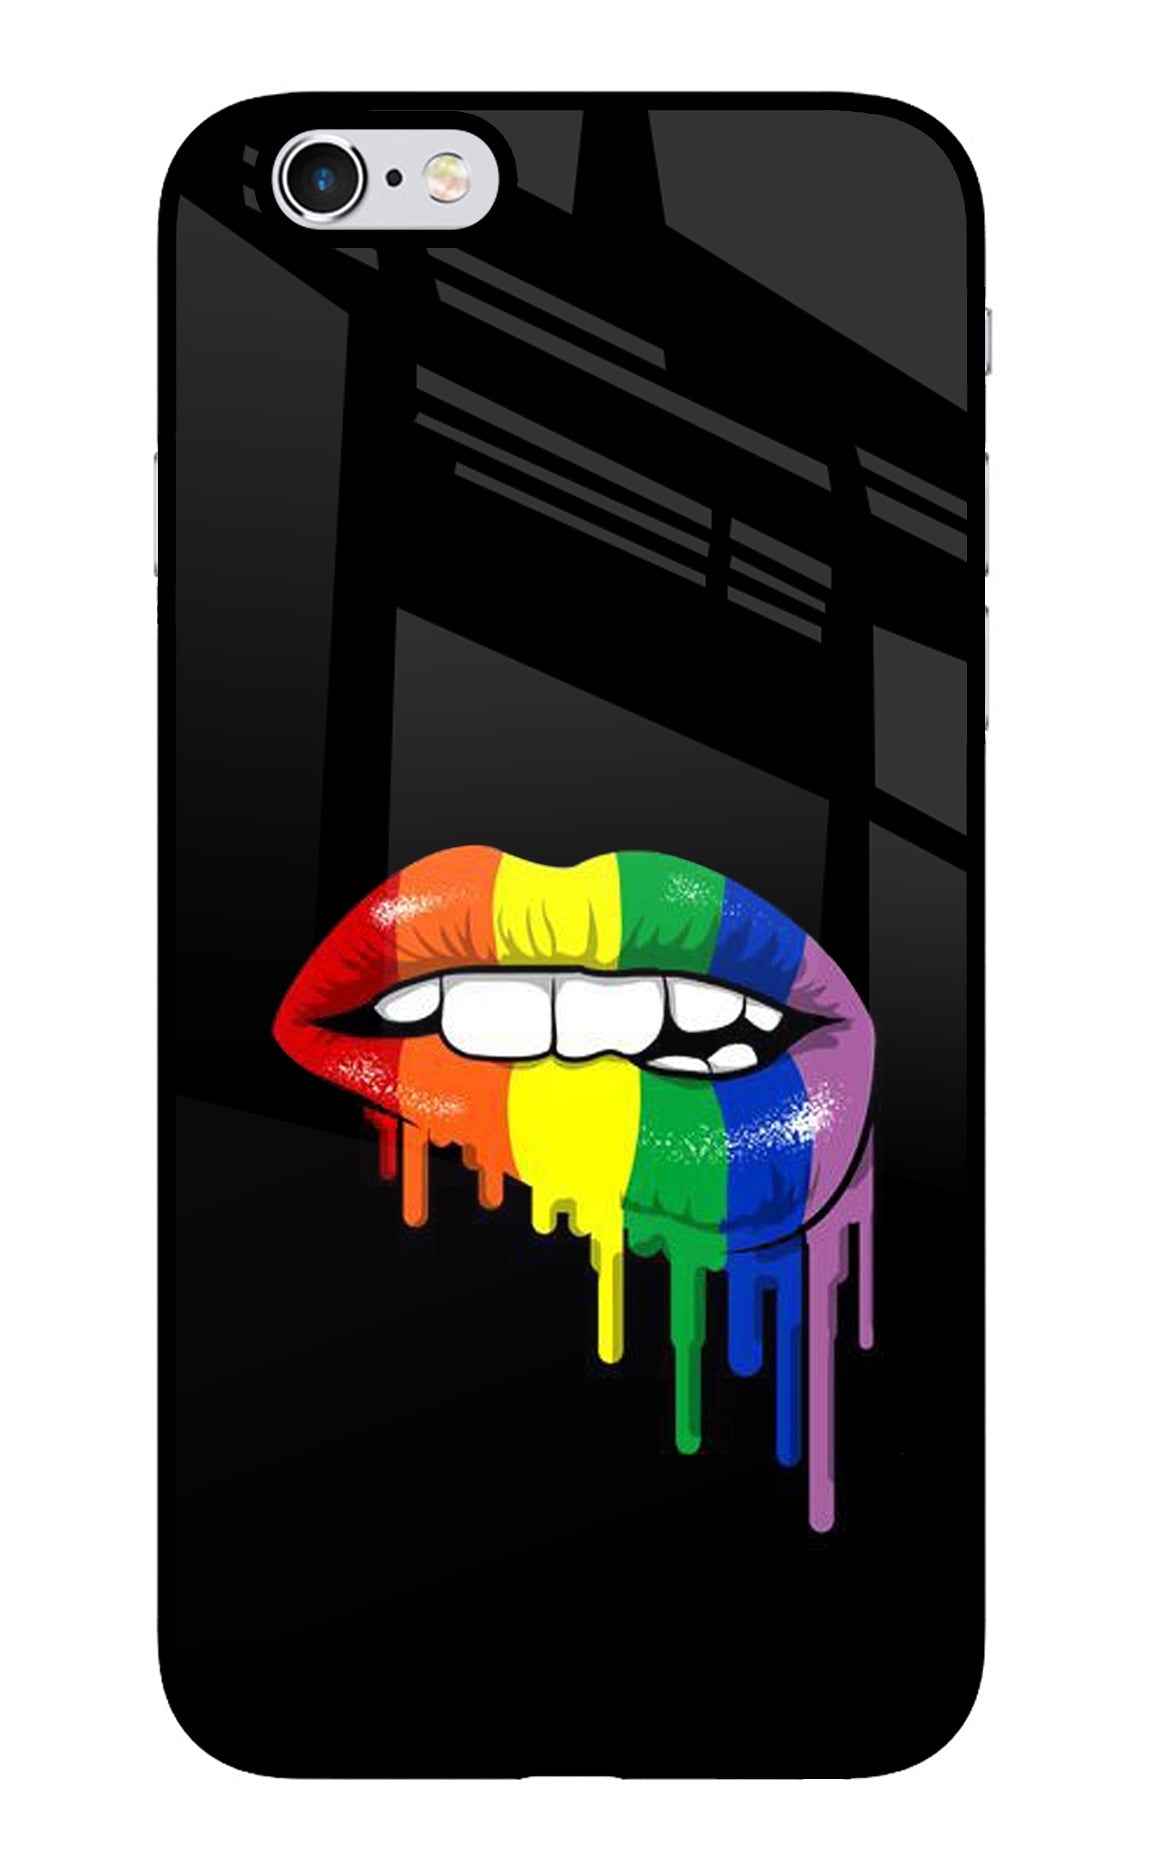 Lips Biting iPhone 6/6s Back Cover